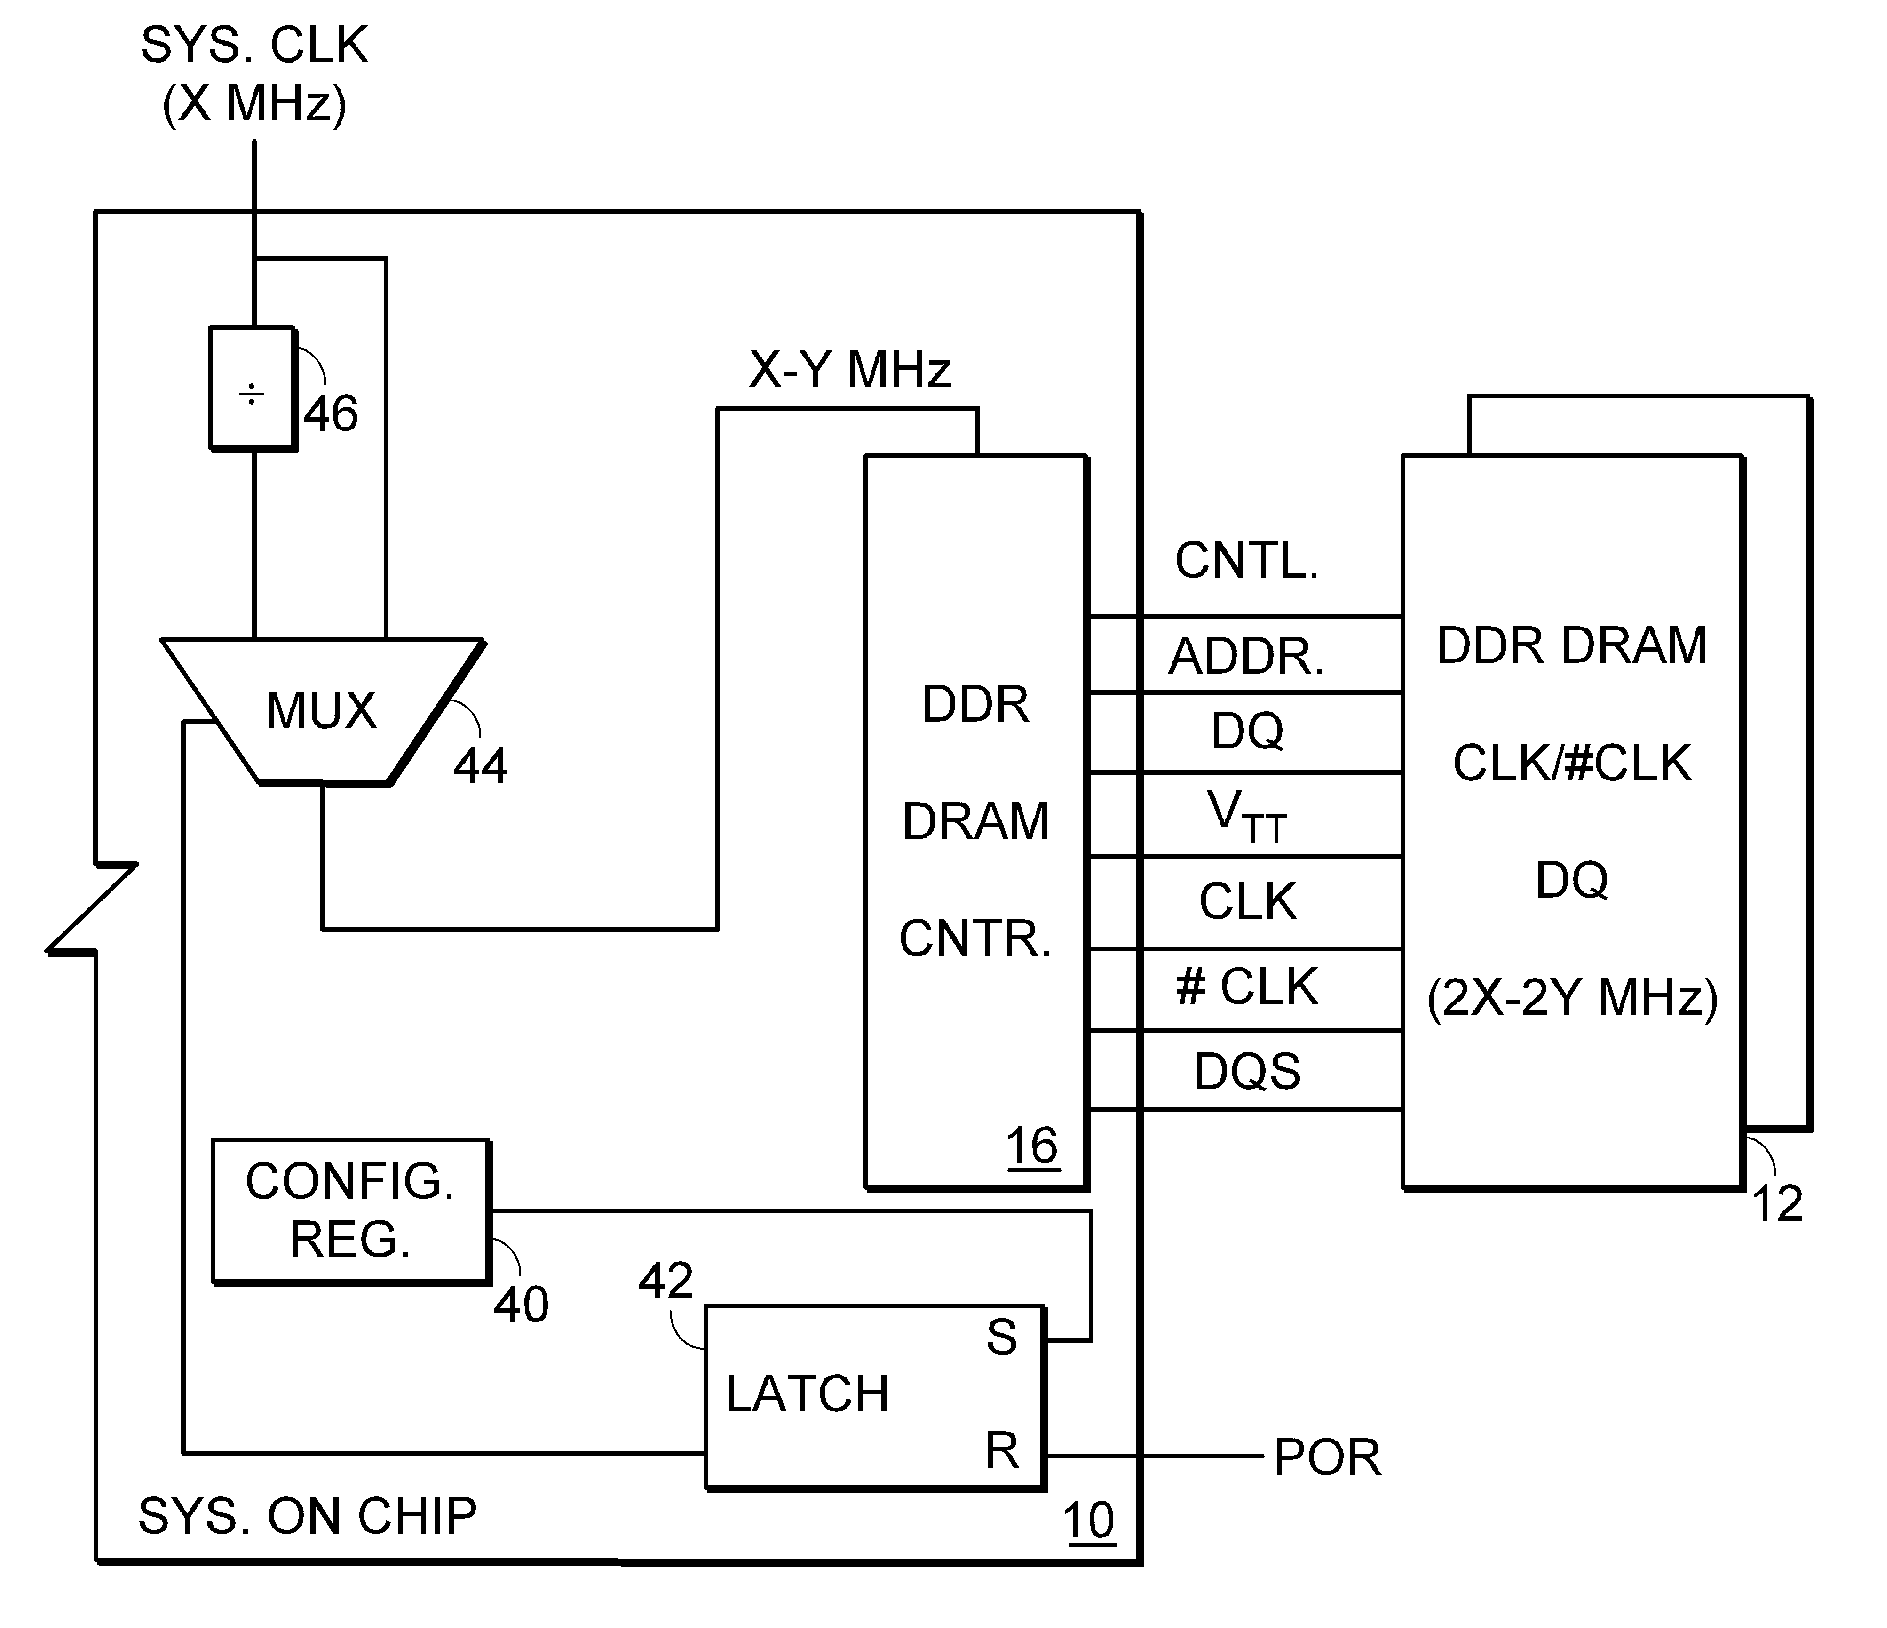 Low power memory controller with leaded double data rate DRAM package on a two layer printed circuit board